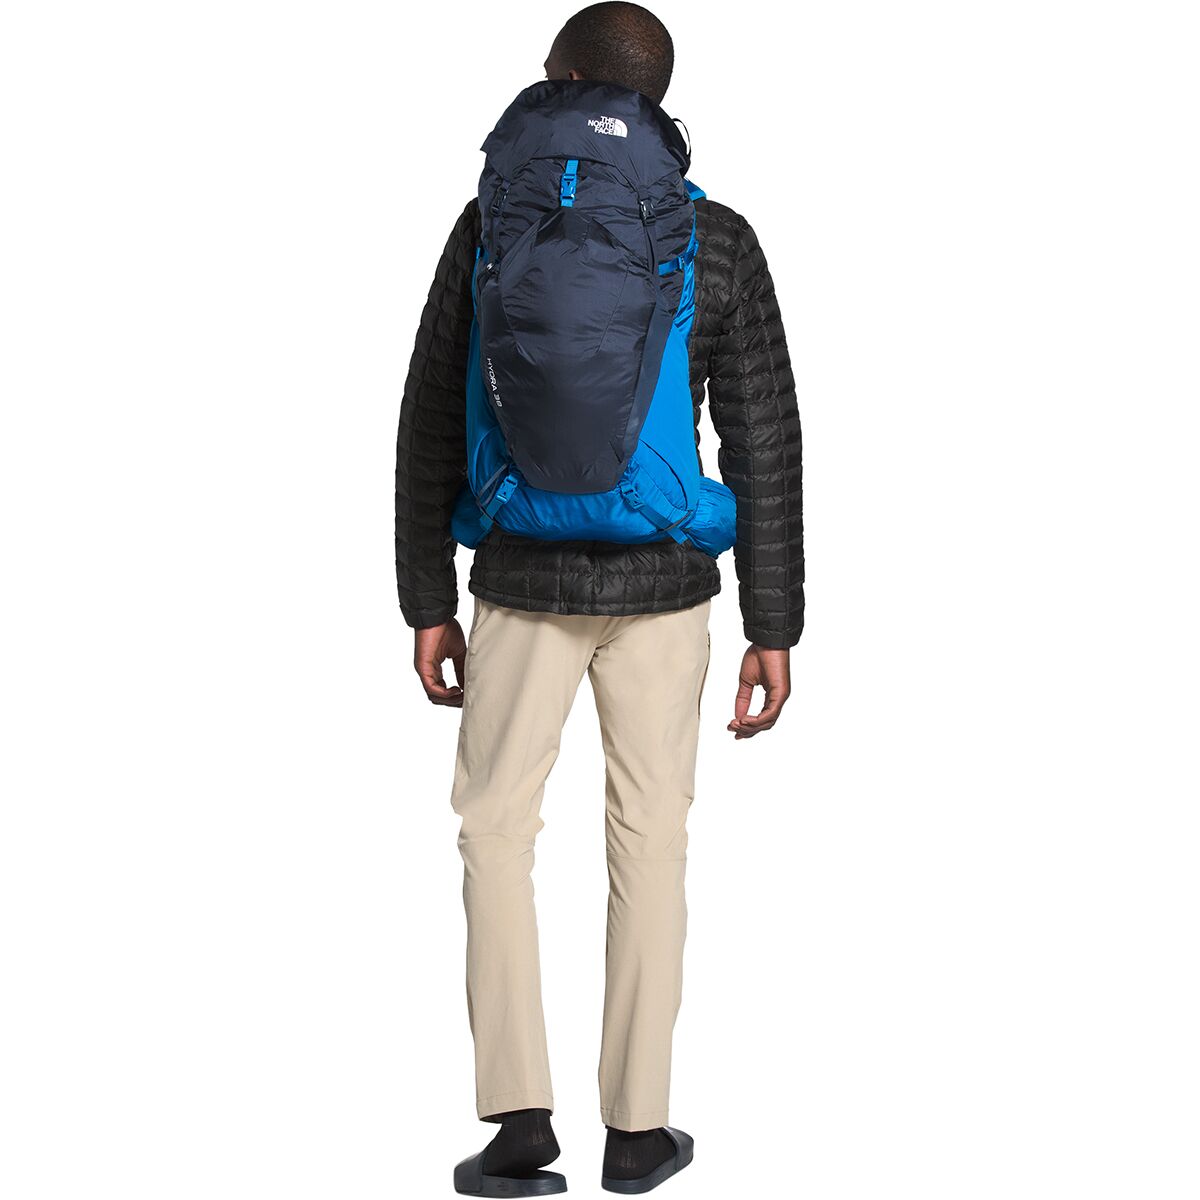 griffin 75 backpack